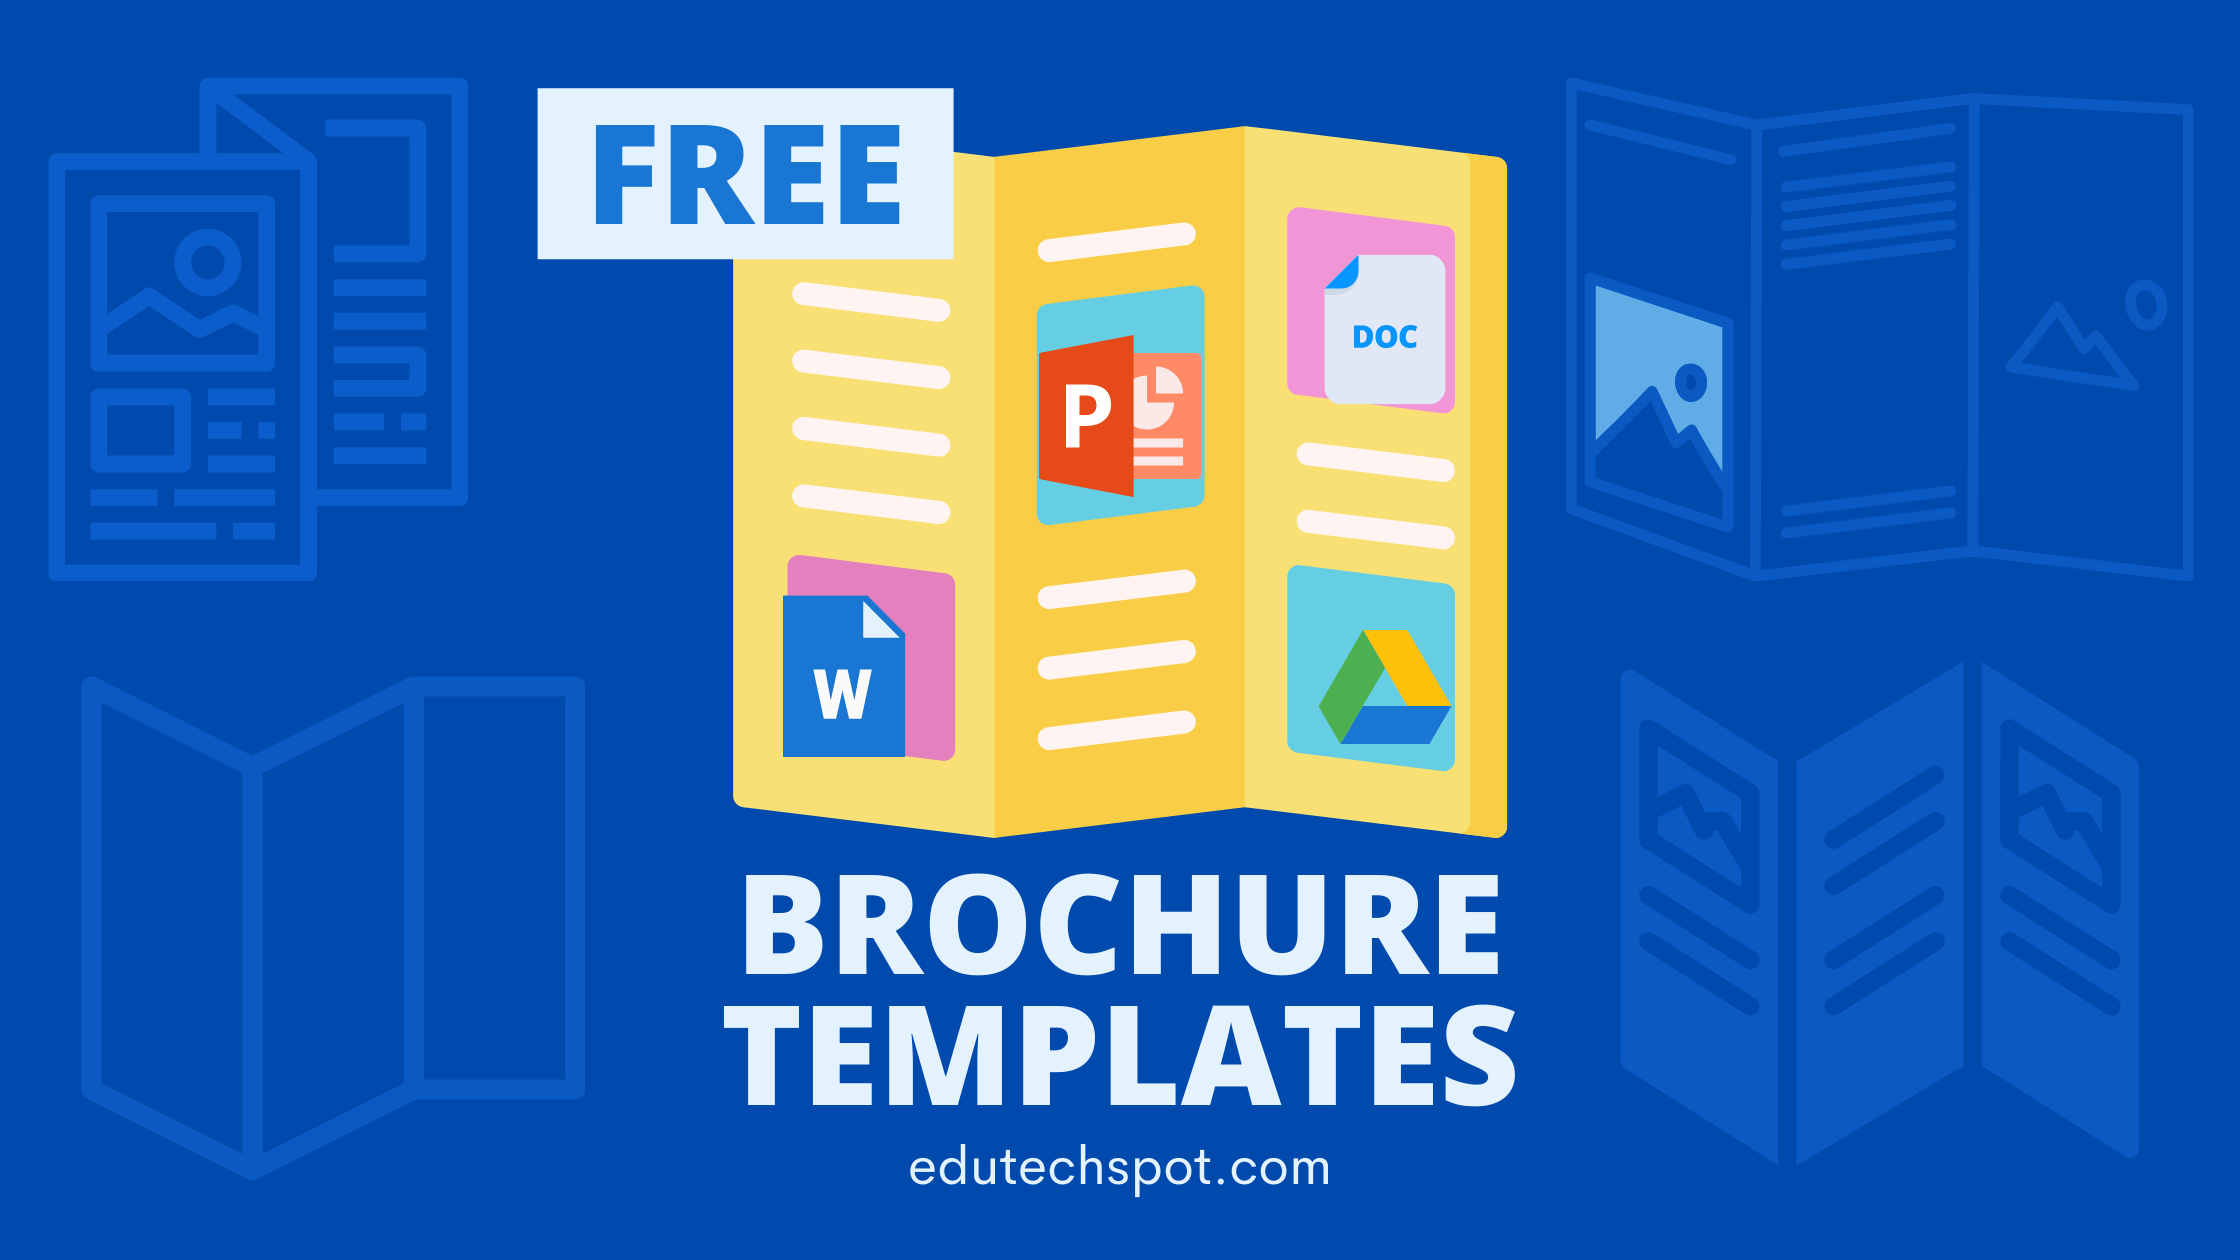 Brochure Template for google docs, Words, Power Point, Slides [ FREE ] Intended For Brochure Template Google Drive